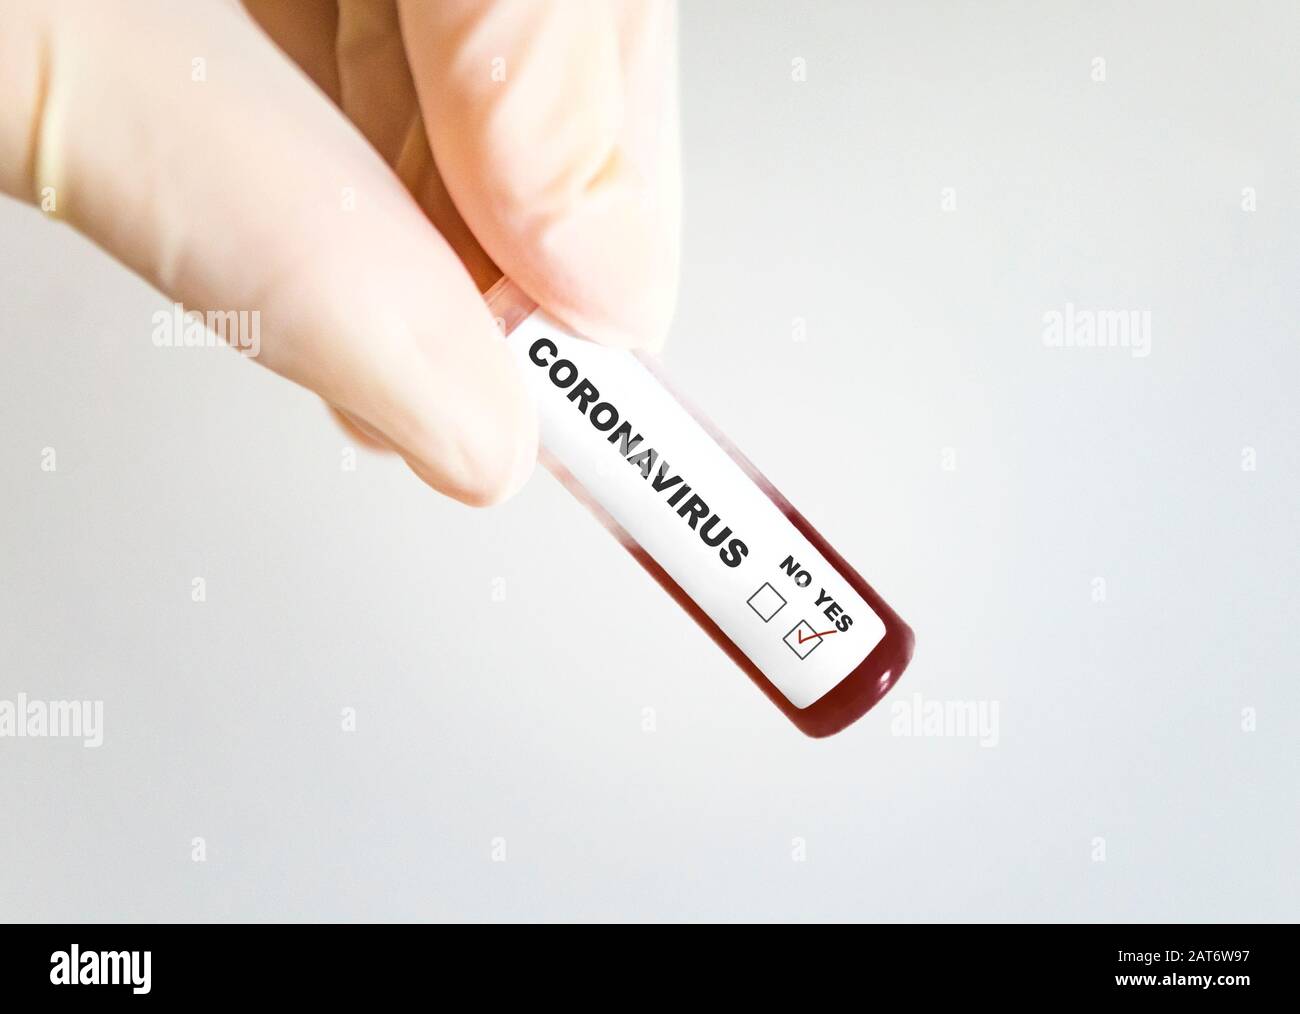 Test tube with blood infected by coronavirus Stock Photo